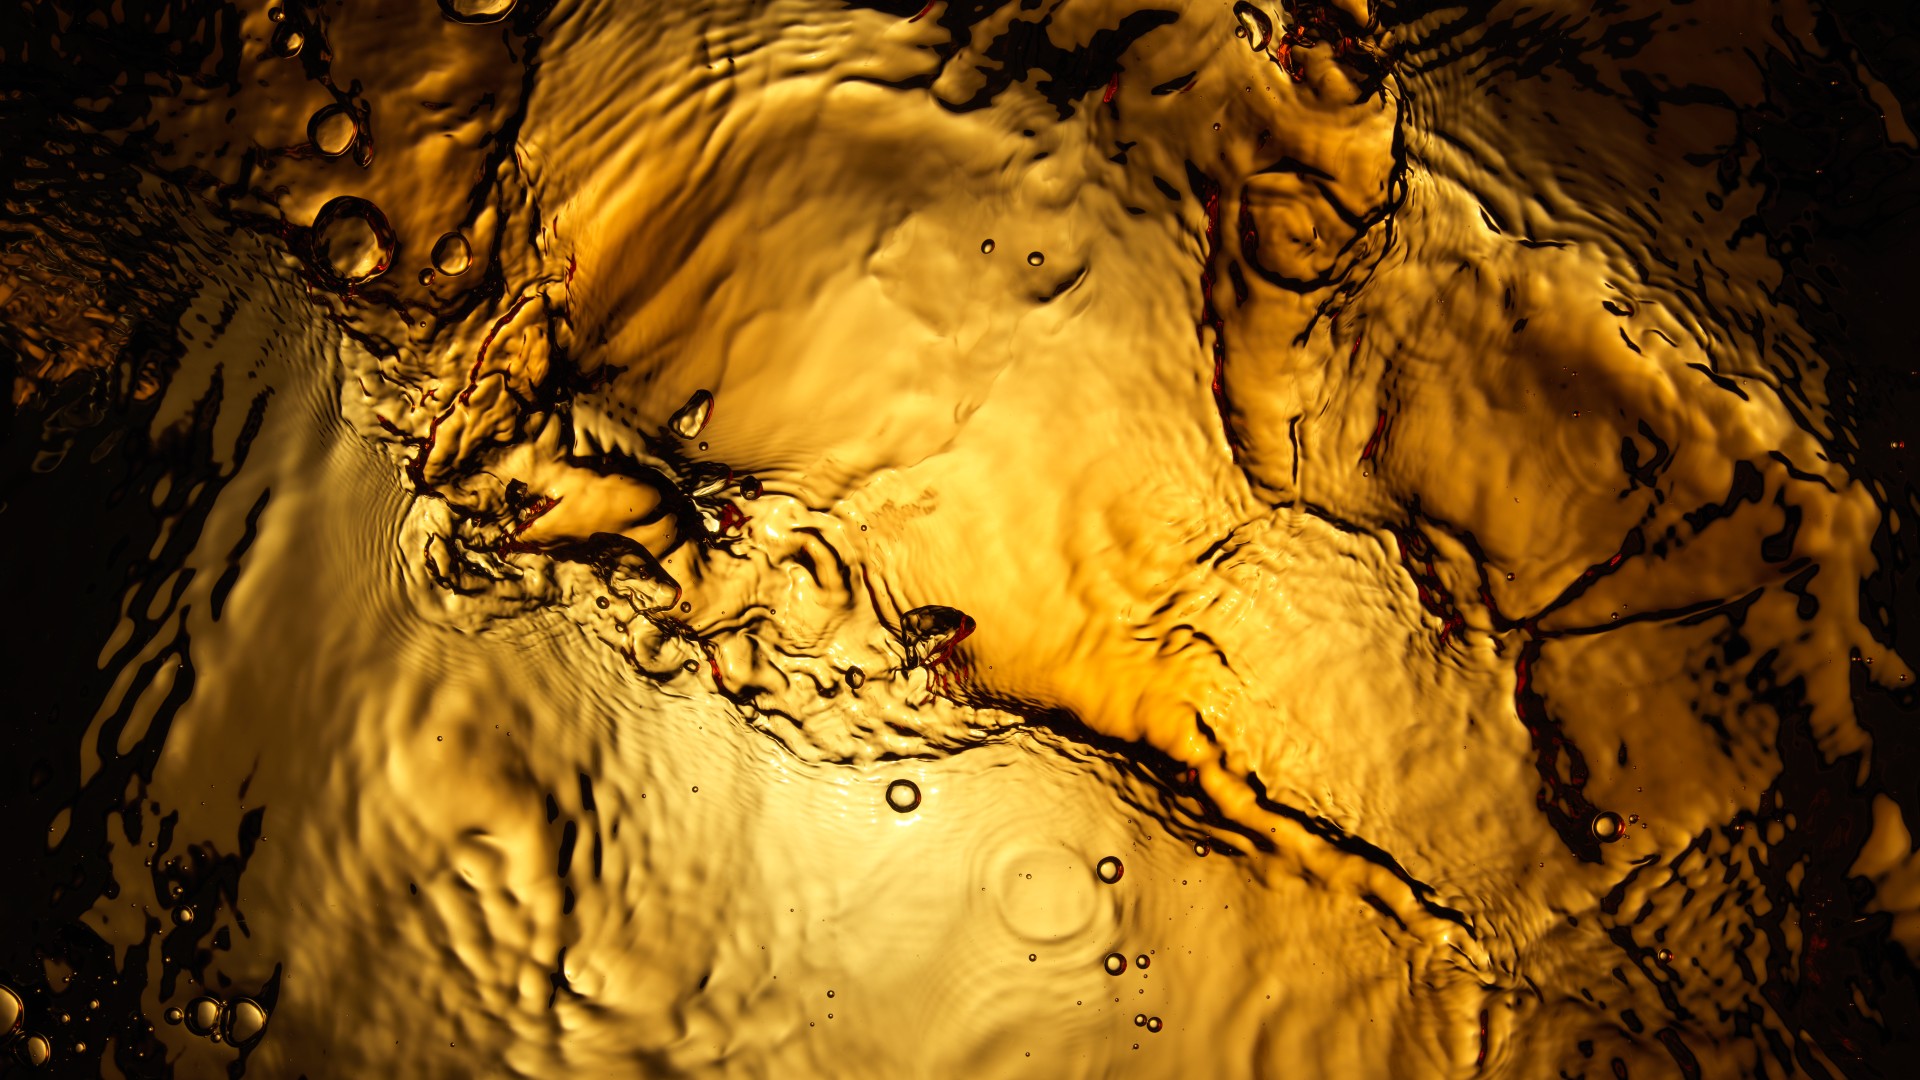 Gold liquid. Jonathan Knowles via Getty Images